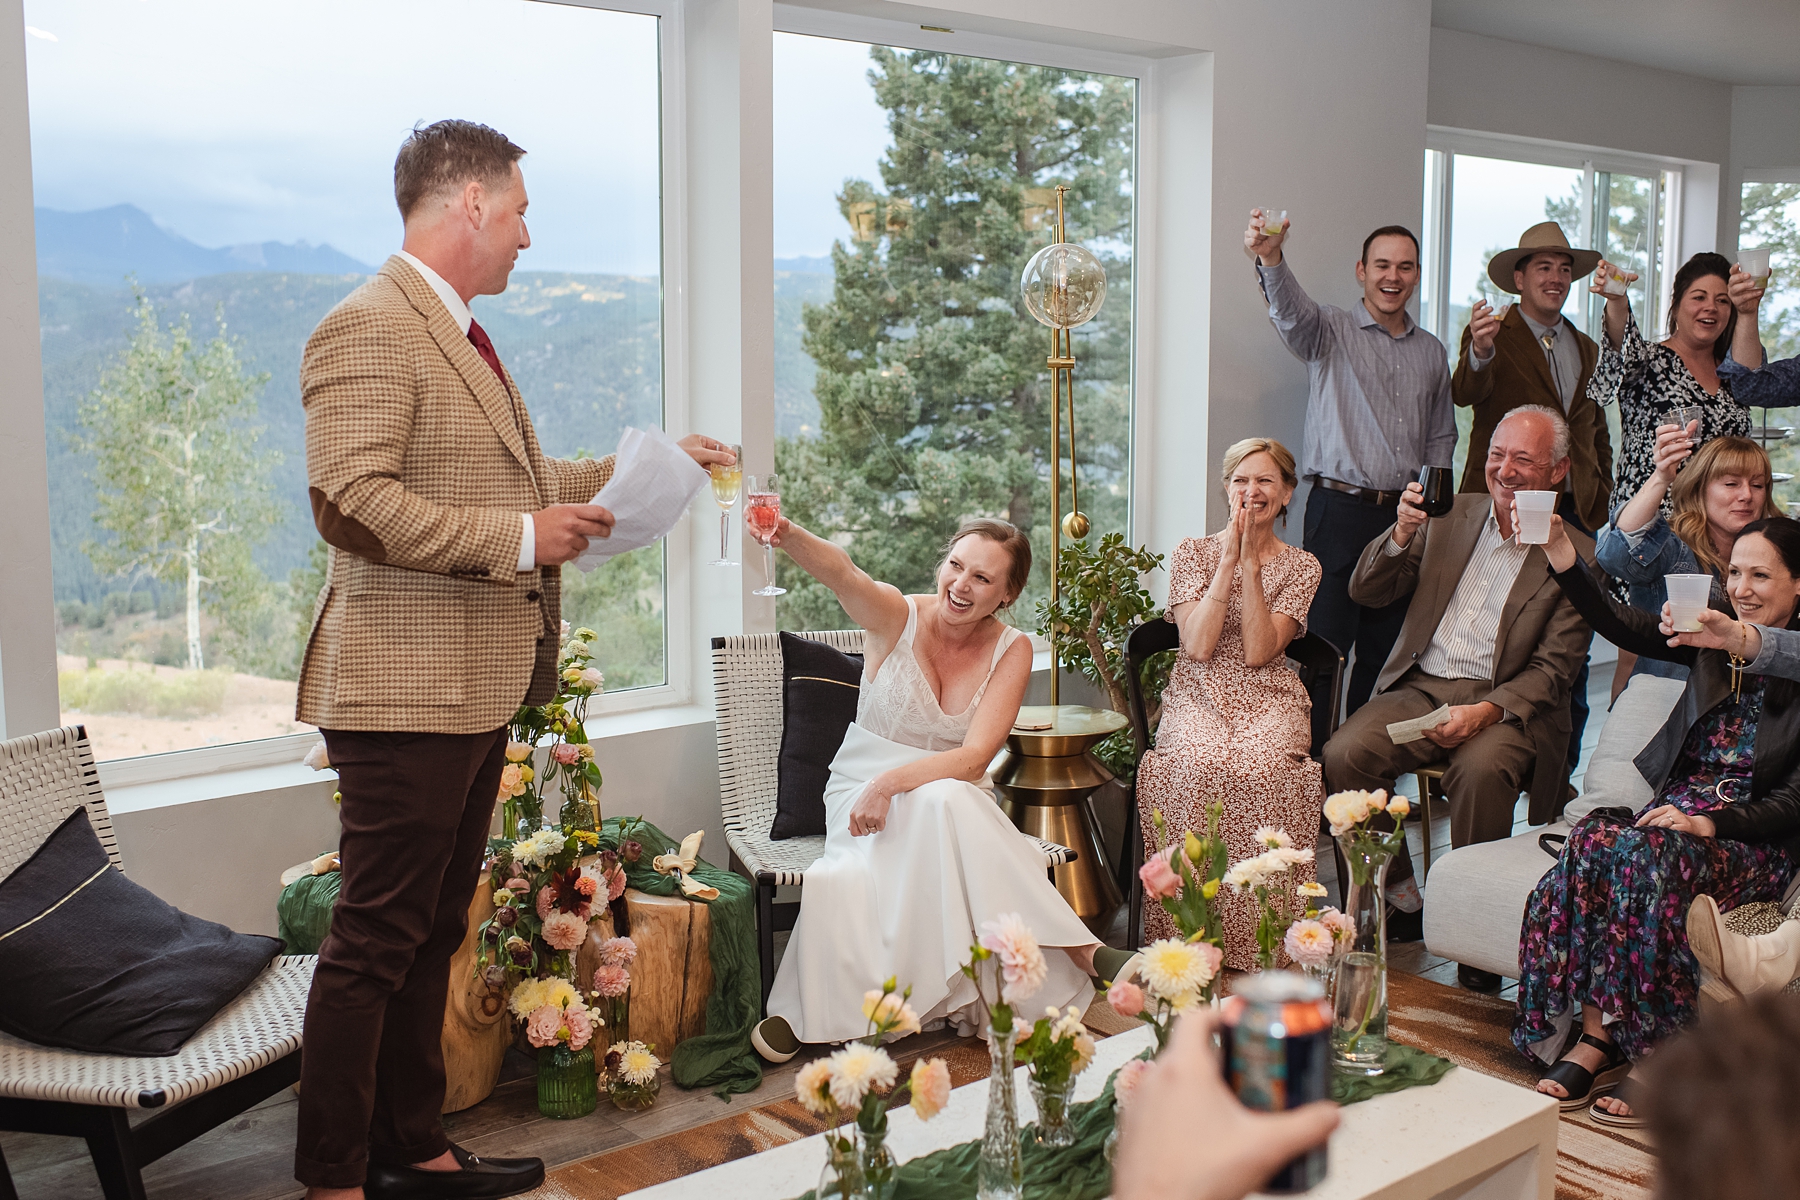 Wedding guests toasting to bride and groom's surprise pregnancy announcement at wedding reception 